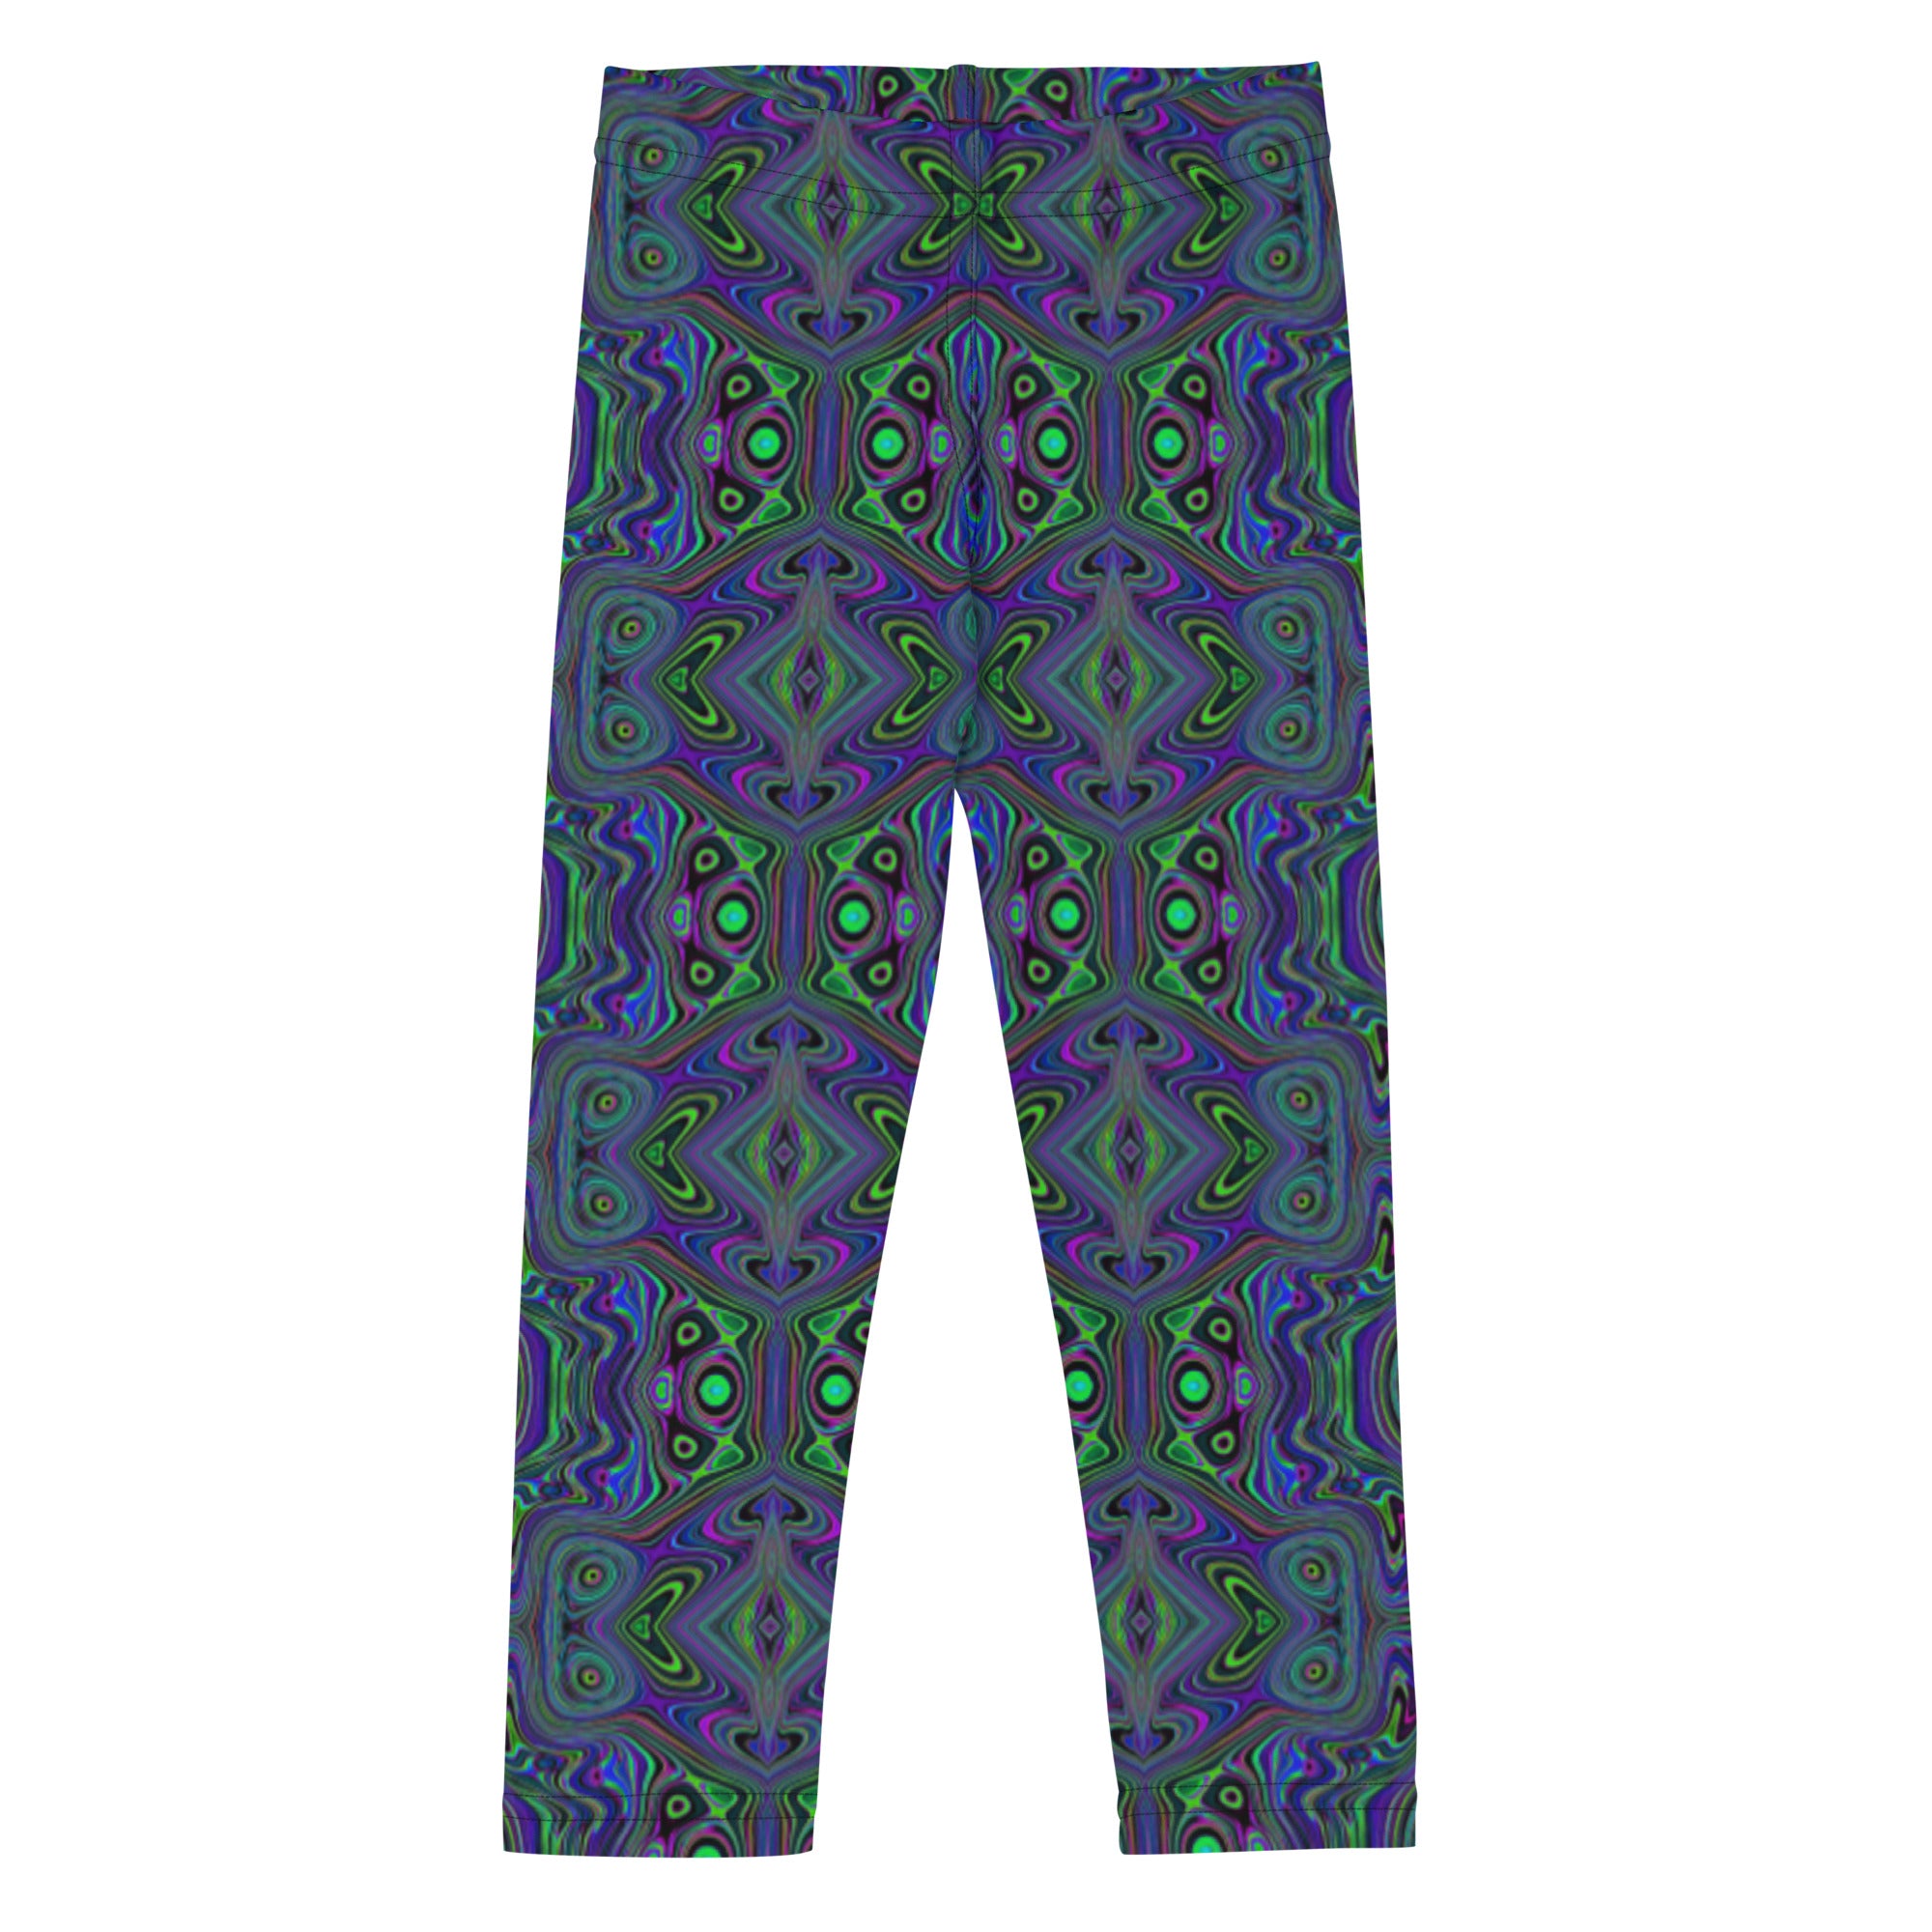 Kid's Leggings, Trippy Retro Royal Blue and Lime Green Abstract